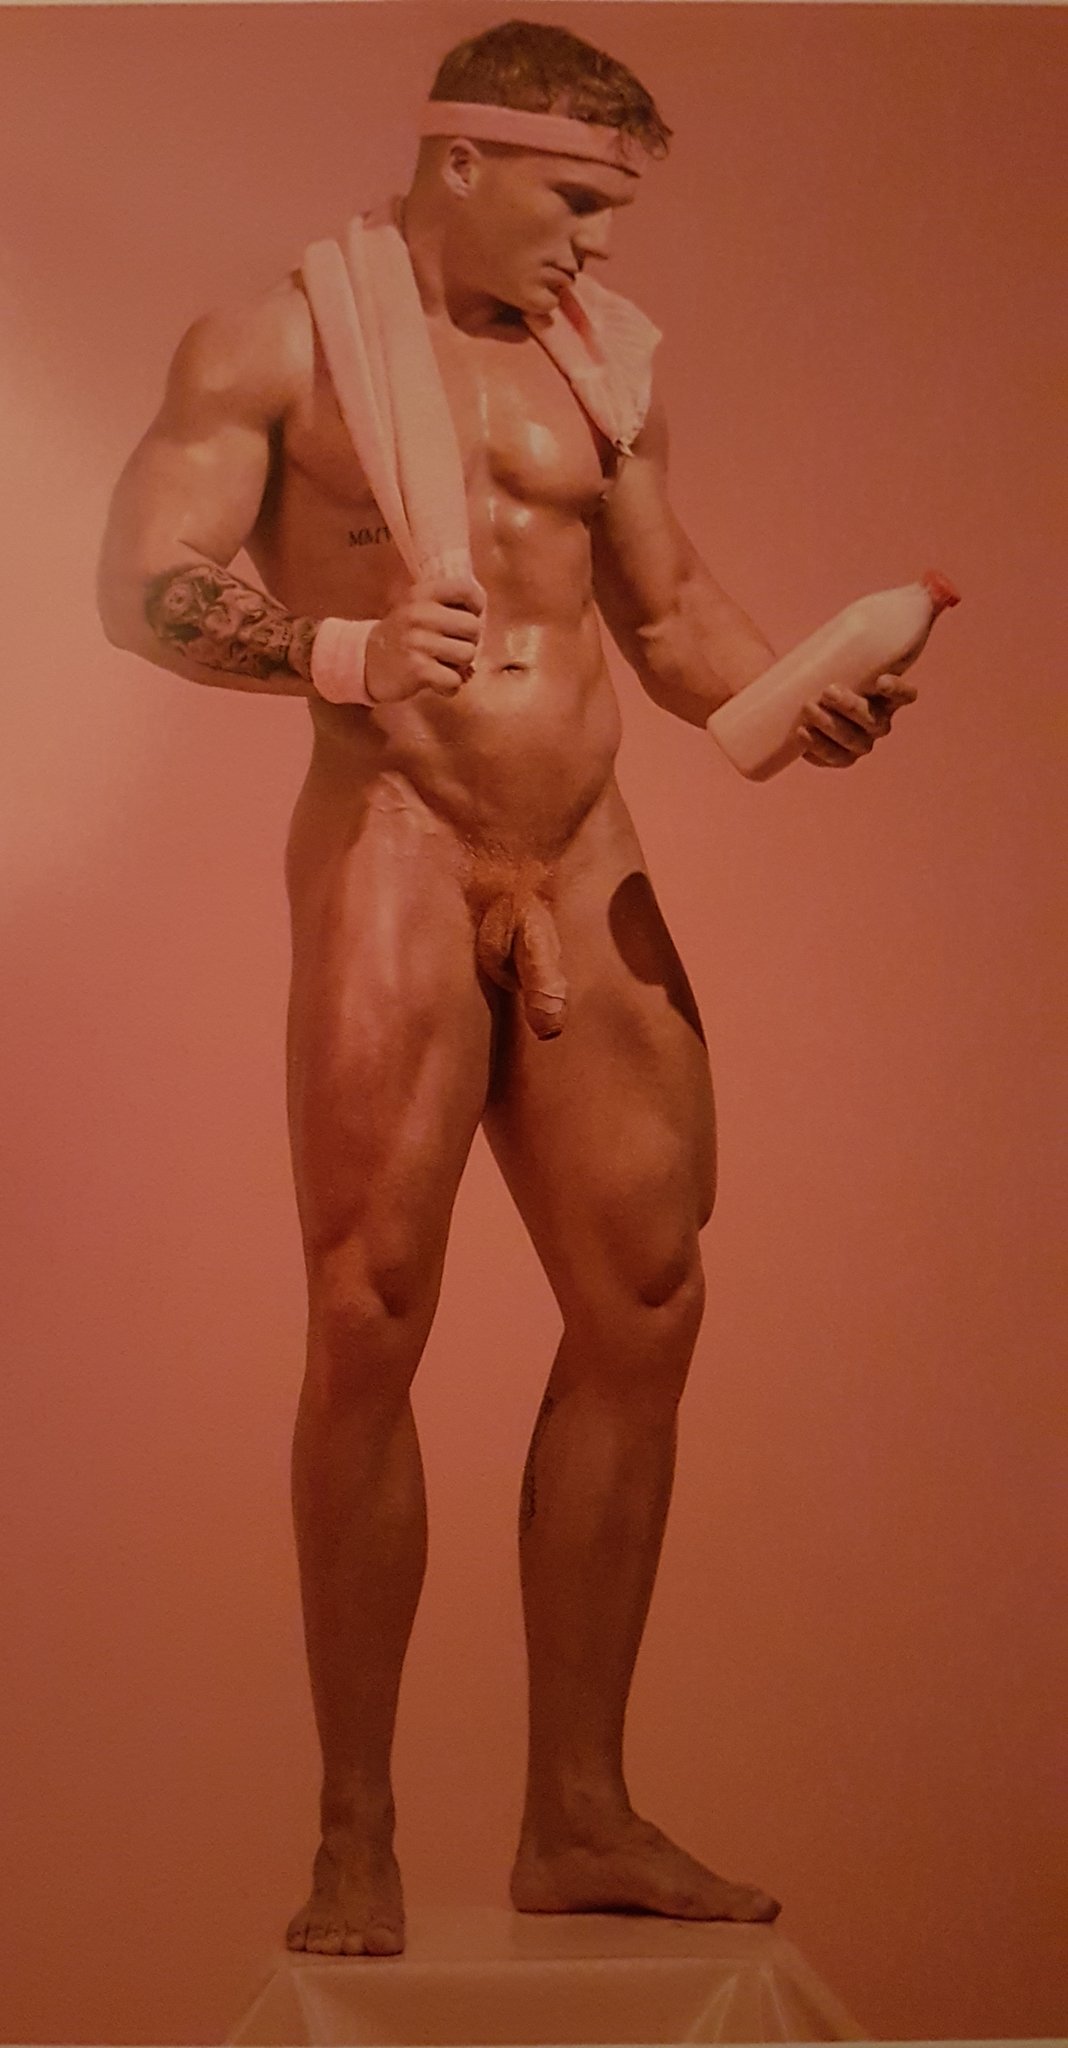 Anonymous. on Twitter: "HAPPY NEWYEAR! RED HOT COCkS-calendar 2020. January-model: JARED. https://t.co/PygF98KTMI" /